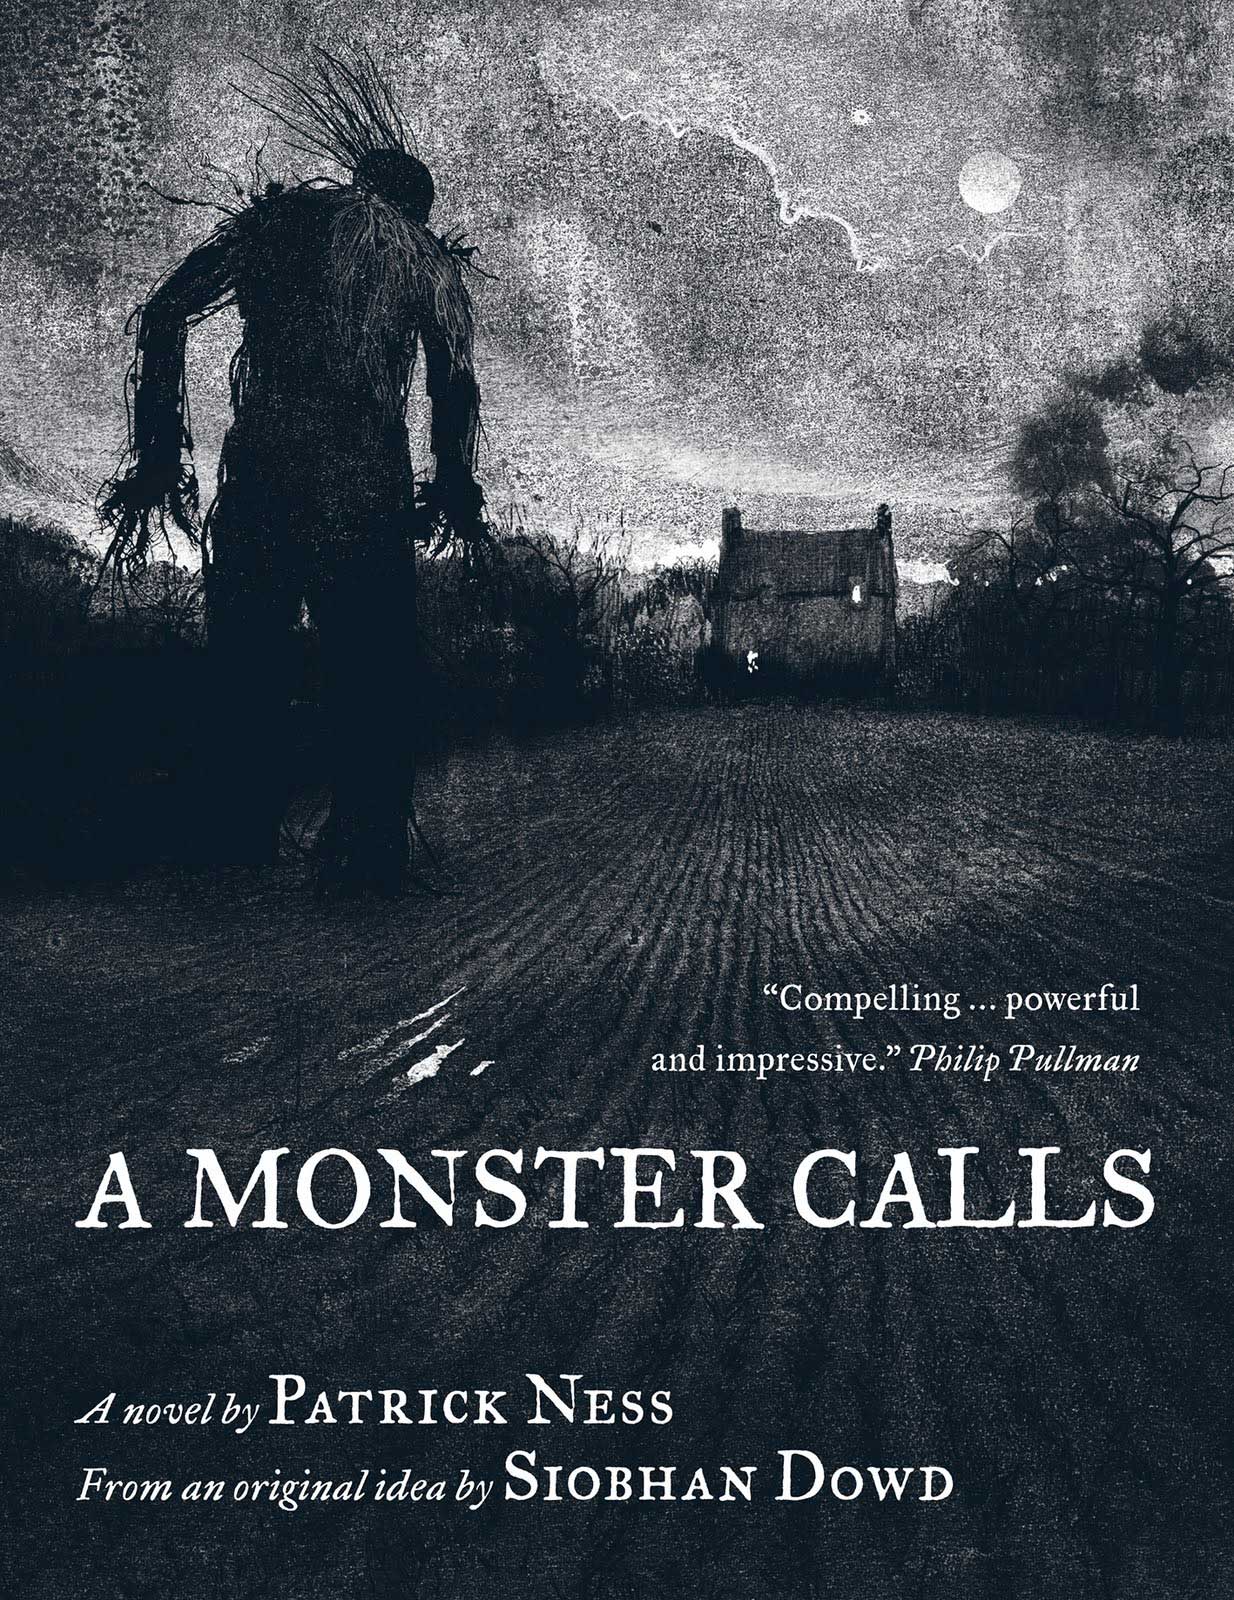 A Monster Calls, by Patrick Ness.
                              
                              
                              
                              A monster helps a boy cope with his mother's terminal cancer.
                              
                              
                              
                              Buy now: A Monster Calls